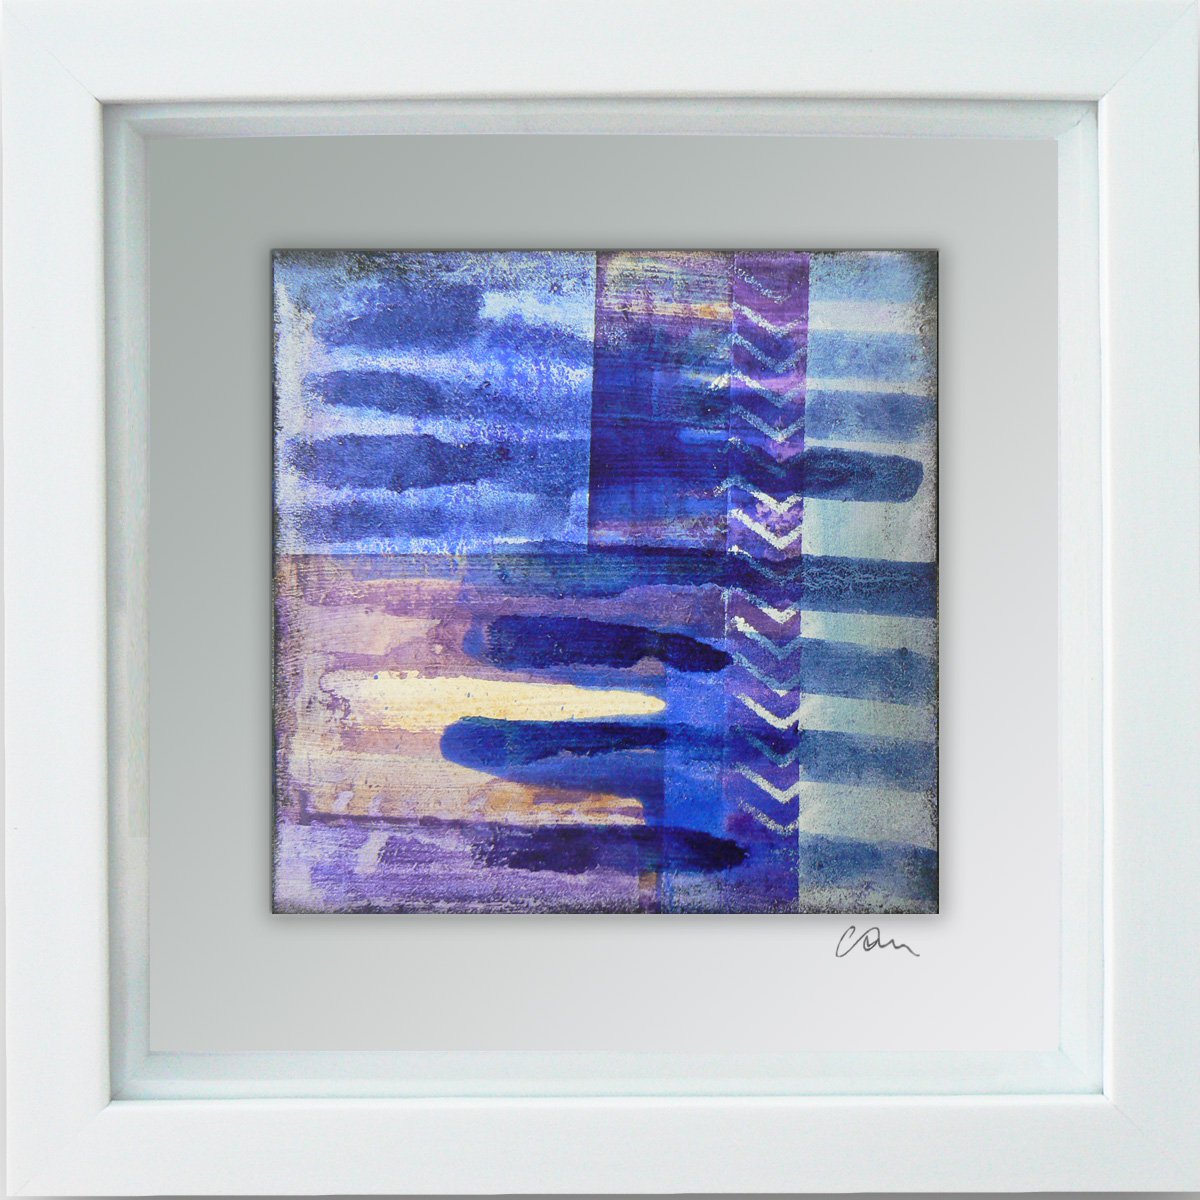 Framed ready to hang original abstract - Cahier #7 by Carolynne Coulson